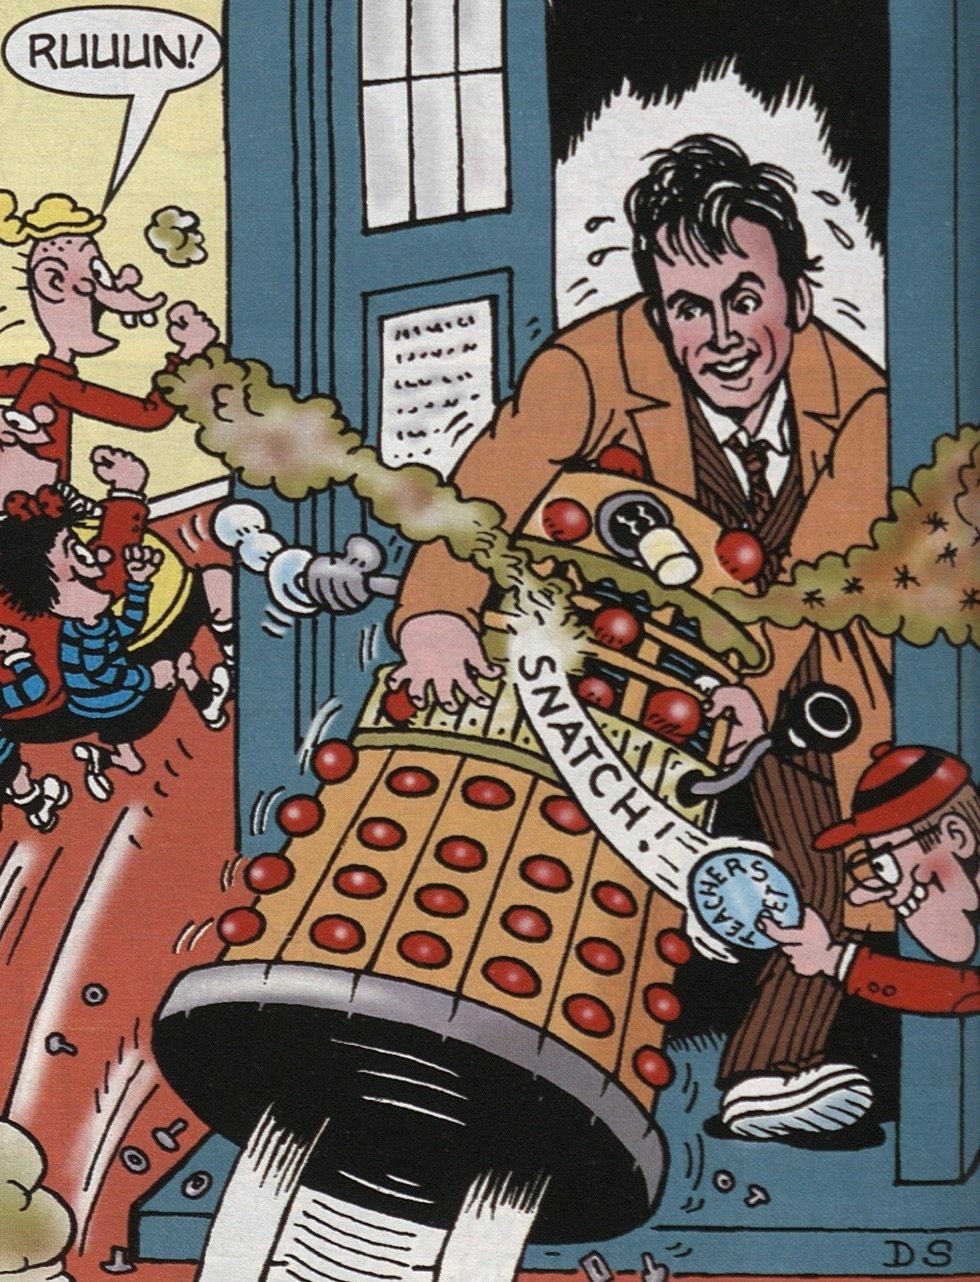 Beano Max Volume 1 March 2007 featured a strip with Doctor Who star David Tennant saving Bash Street from a Dalek invasion